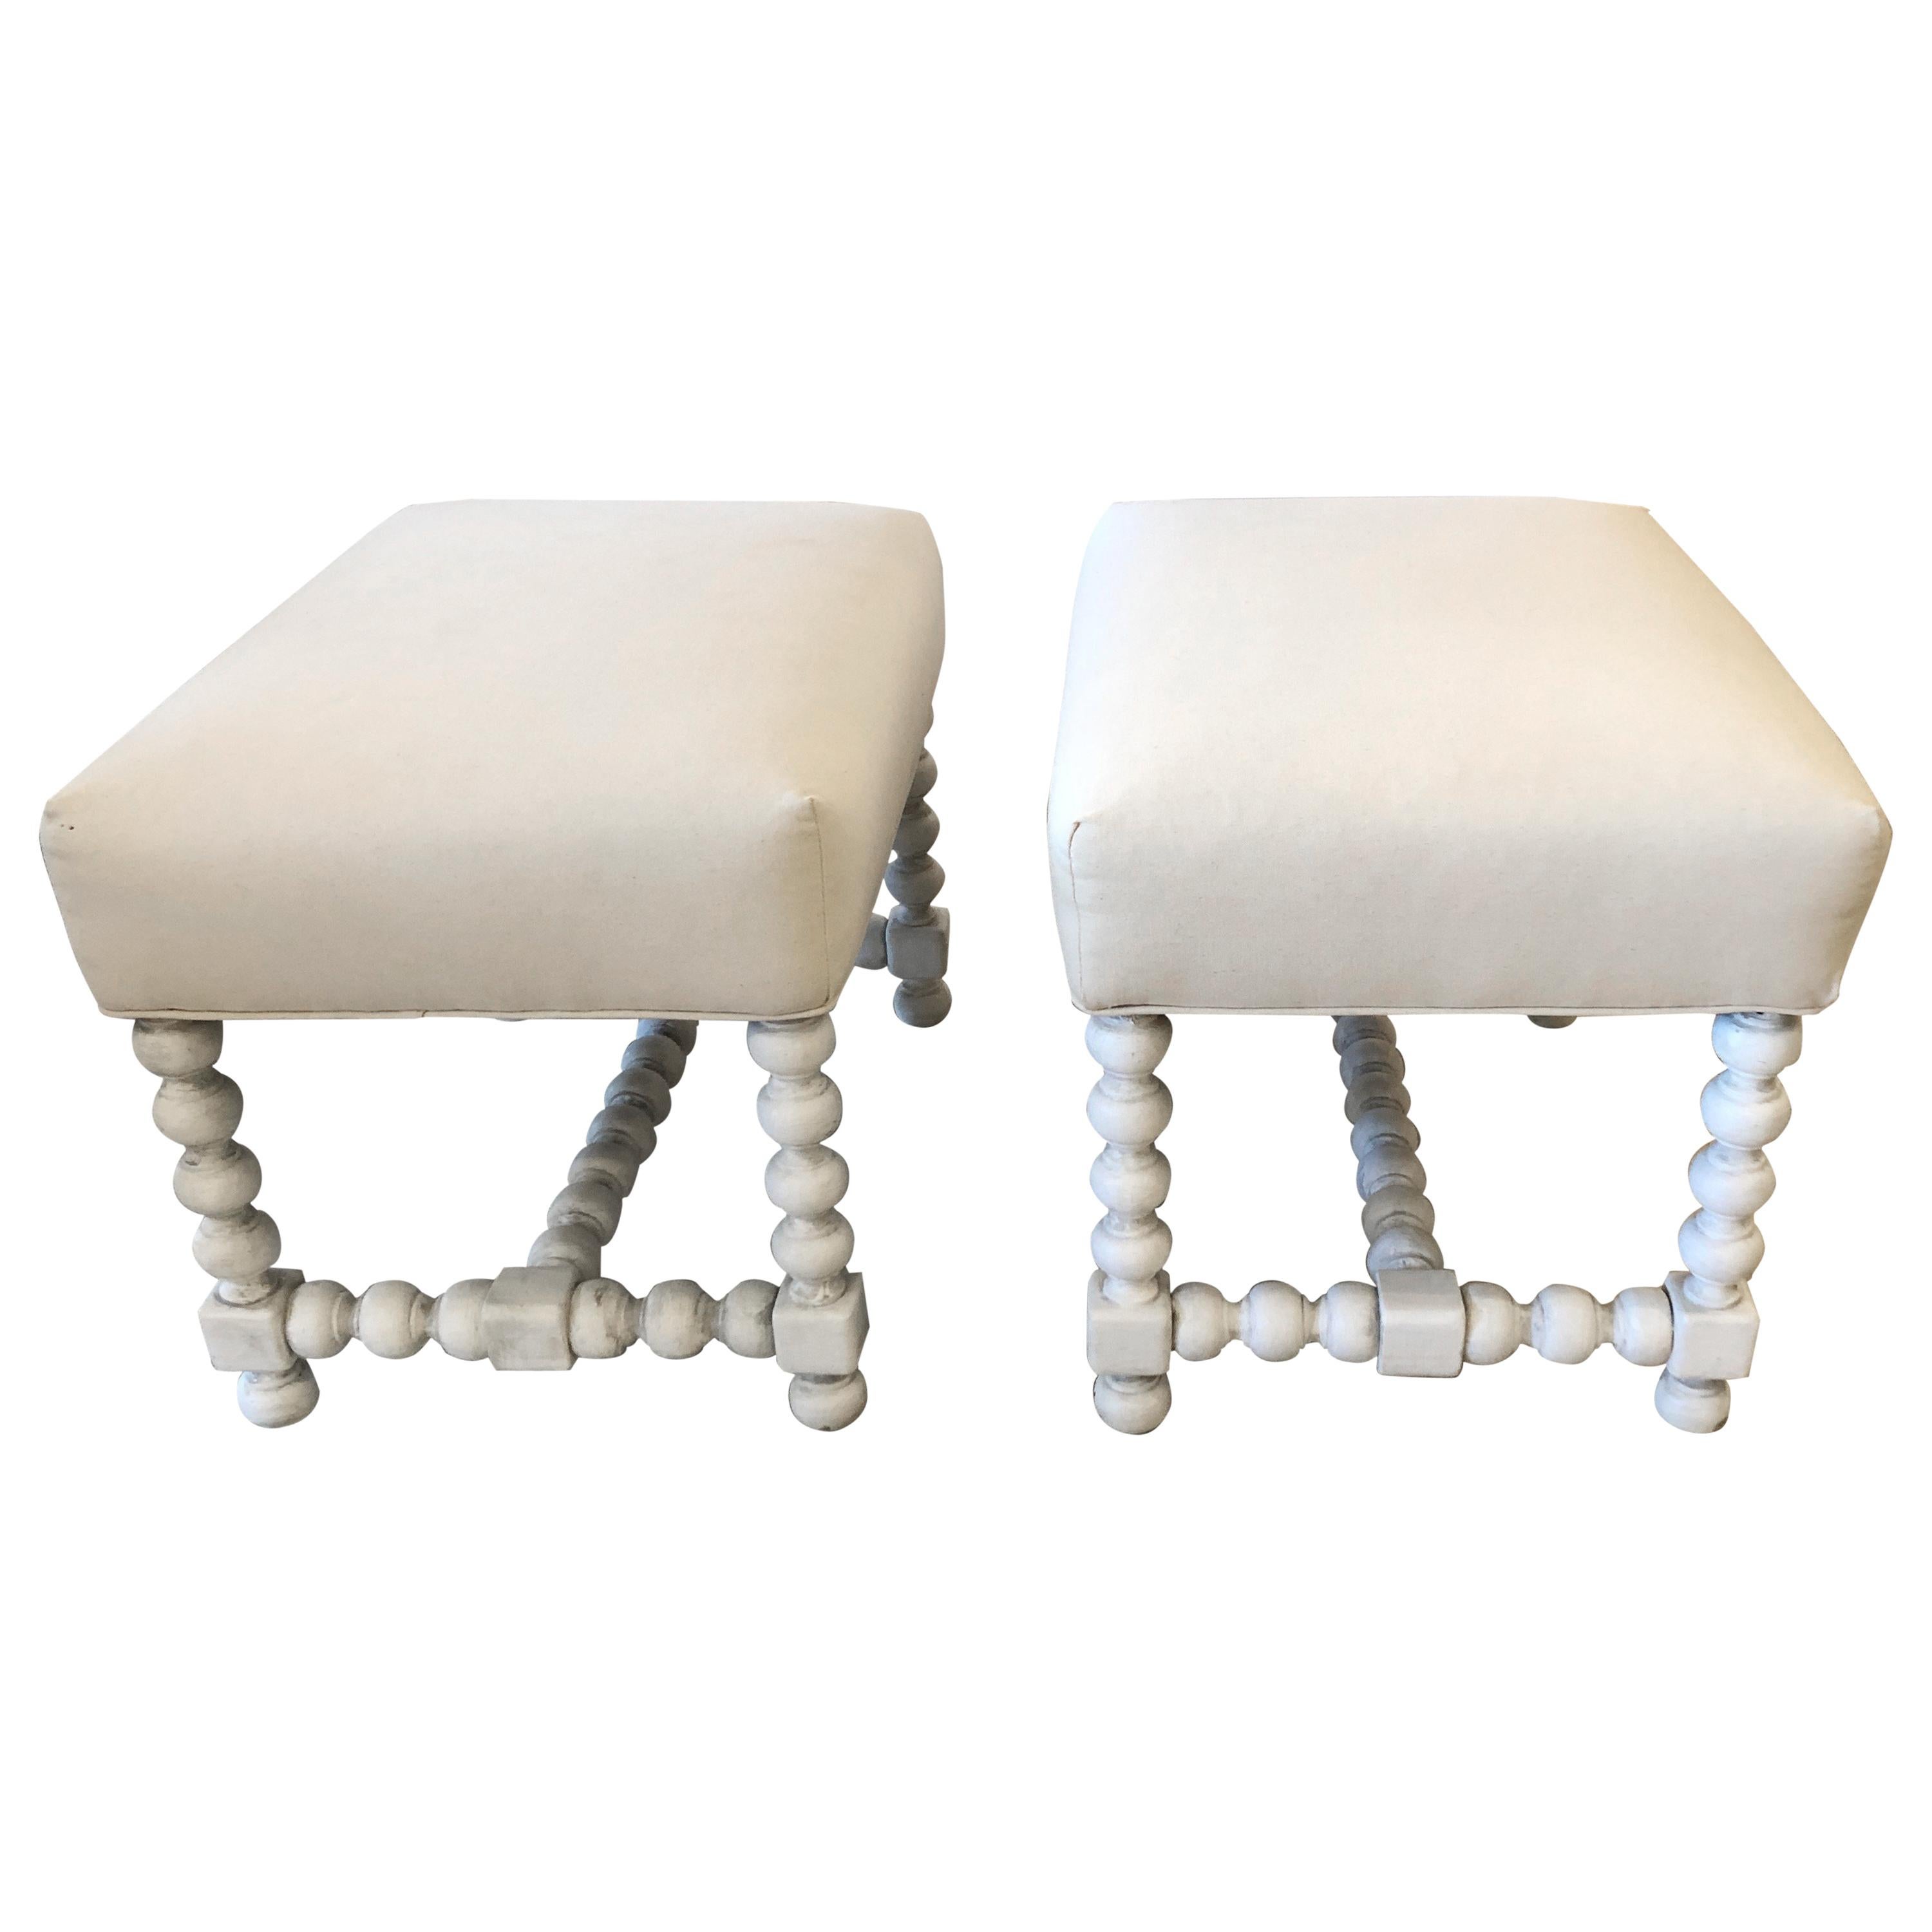 Stylish Pair of Painted Wood and Upholstered Benches Ottomans